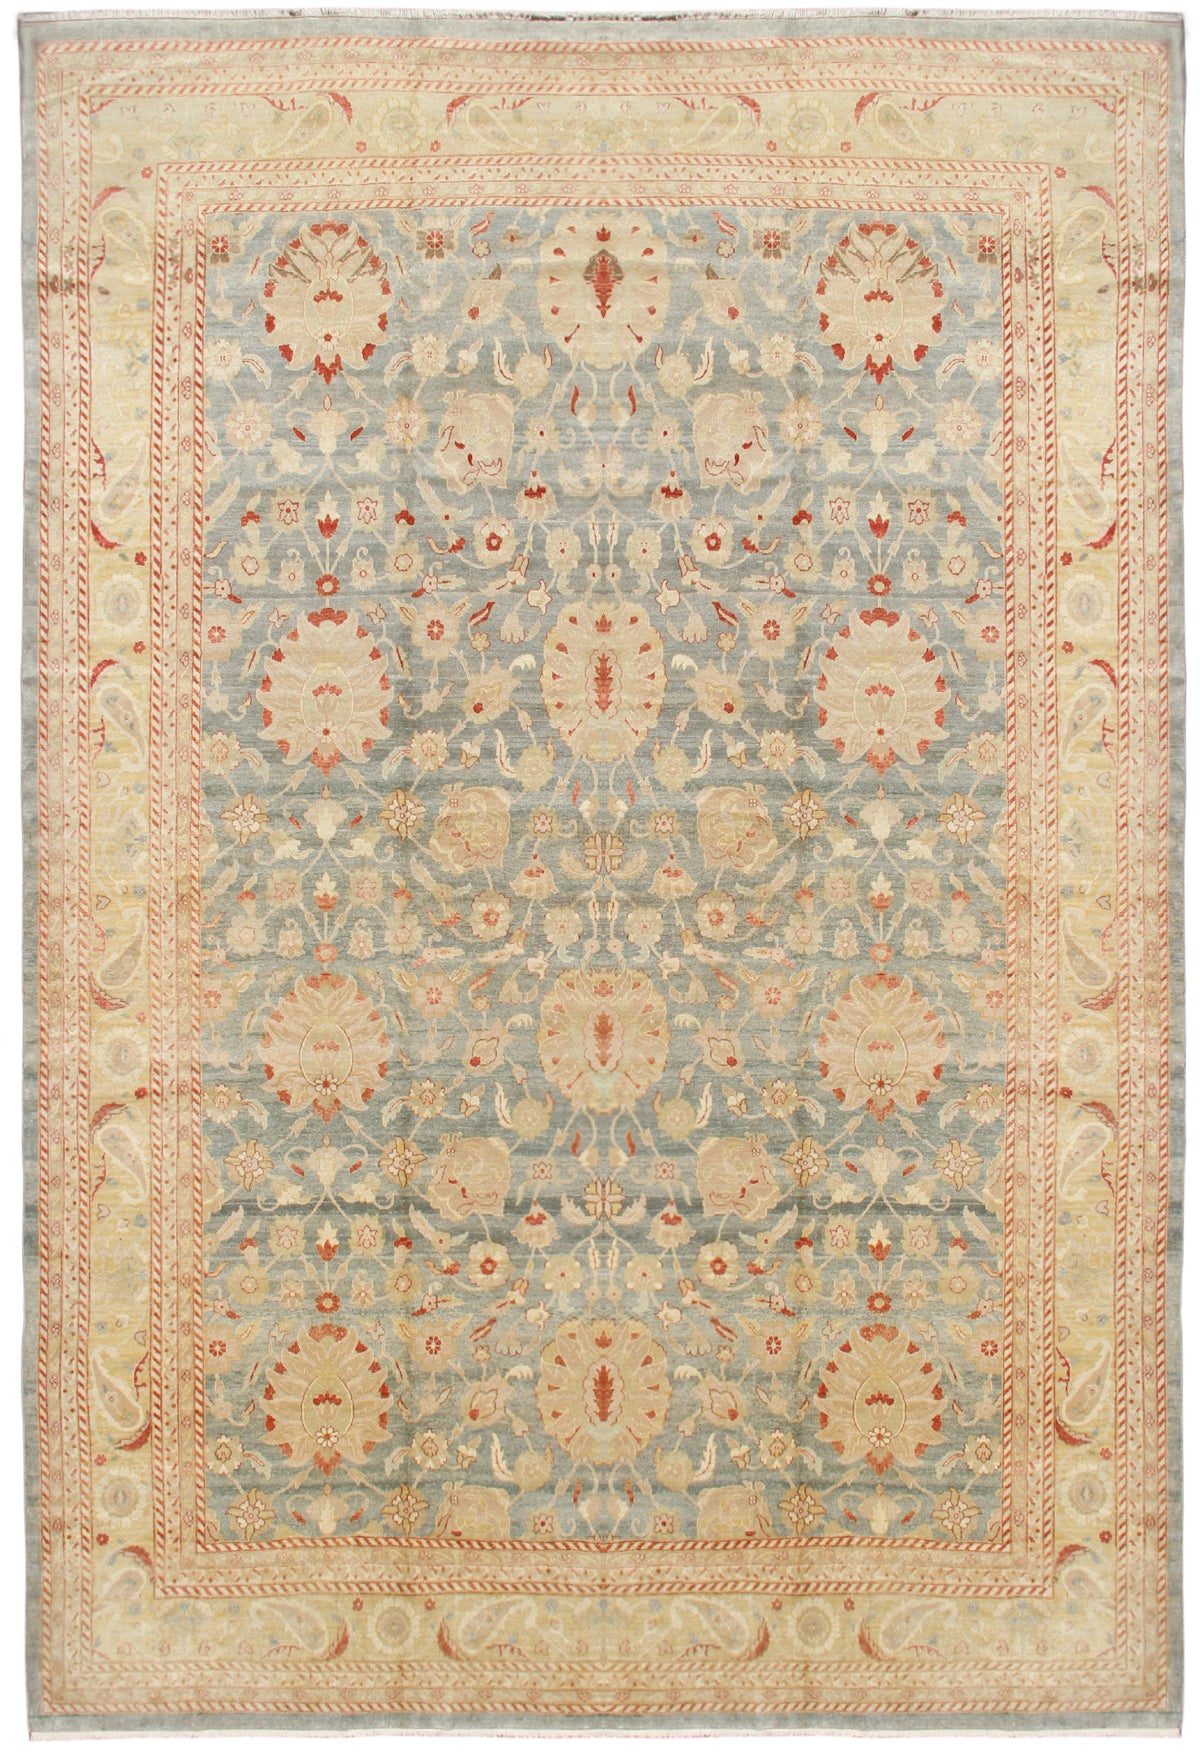 13x18 Aqua Gold Red Persian Sultanabad Design Egyptian Rug